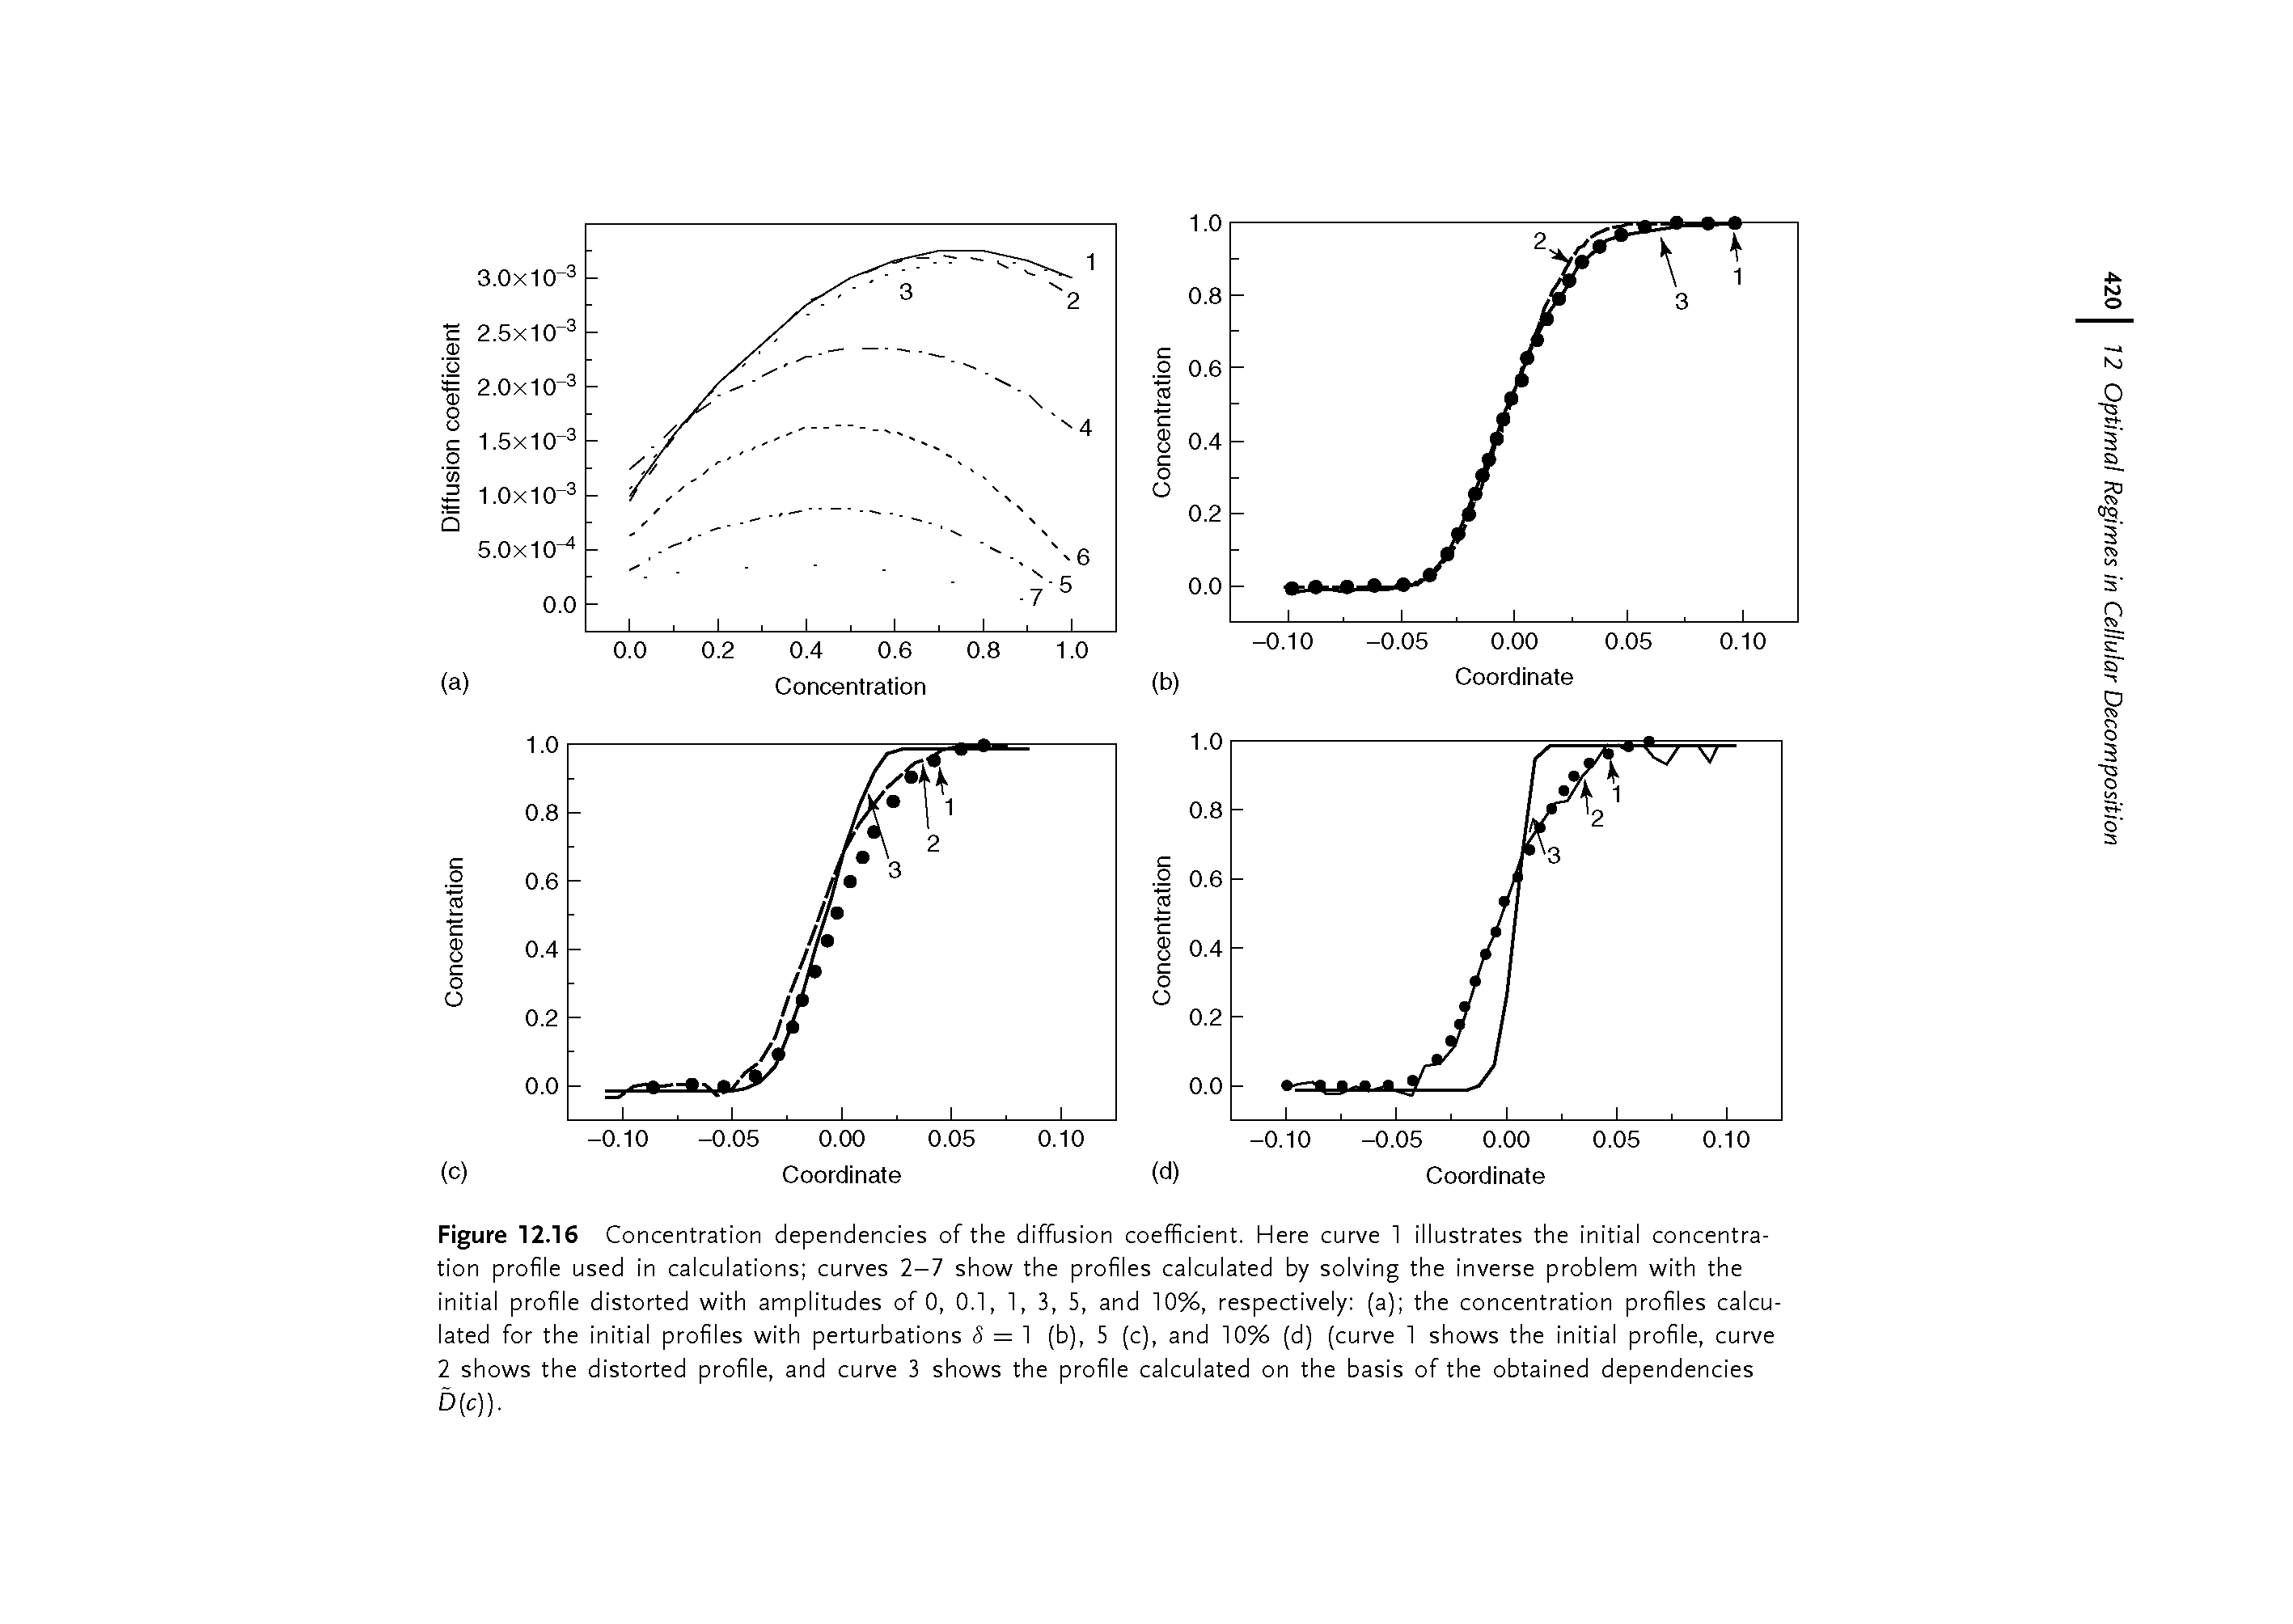 Figure 12.16 Concentration dependencies of the diffusion coefficient. Here curve 1 illustrates the initial concentration profile used in calculations curves 2-7 show the profiles calculated by solving the inverse problem with the initial profile distorted with amplitudes of 0, 0.1, 1, 3, 5, and 10%, respectively (a) the concentration profiles calculated for the initial profiles with perturbations <5 = 1 (b), 5 (c), and 10% (d) (curve 1 shows the initial profile, curve 2 shows the distorted profile, and curve 3 shows the profile calculated on the basis of the obtained dependencies b c)).